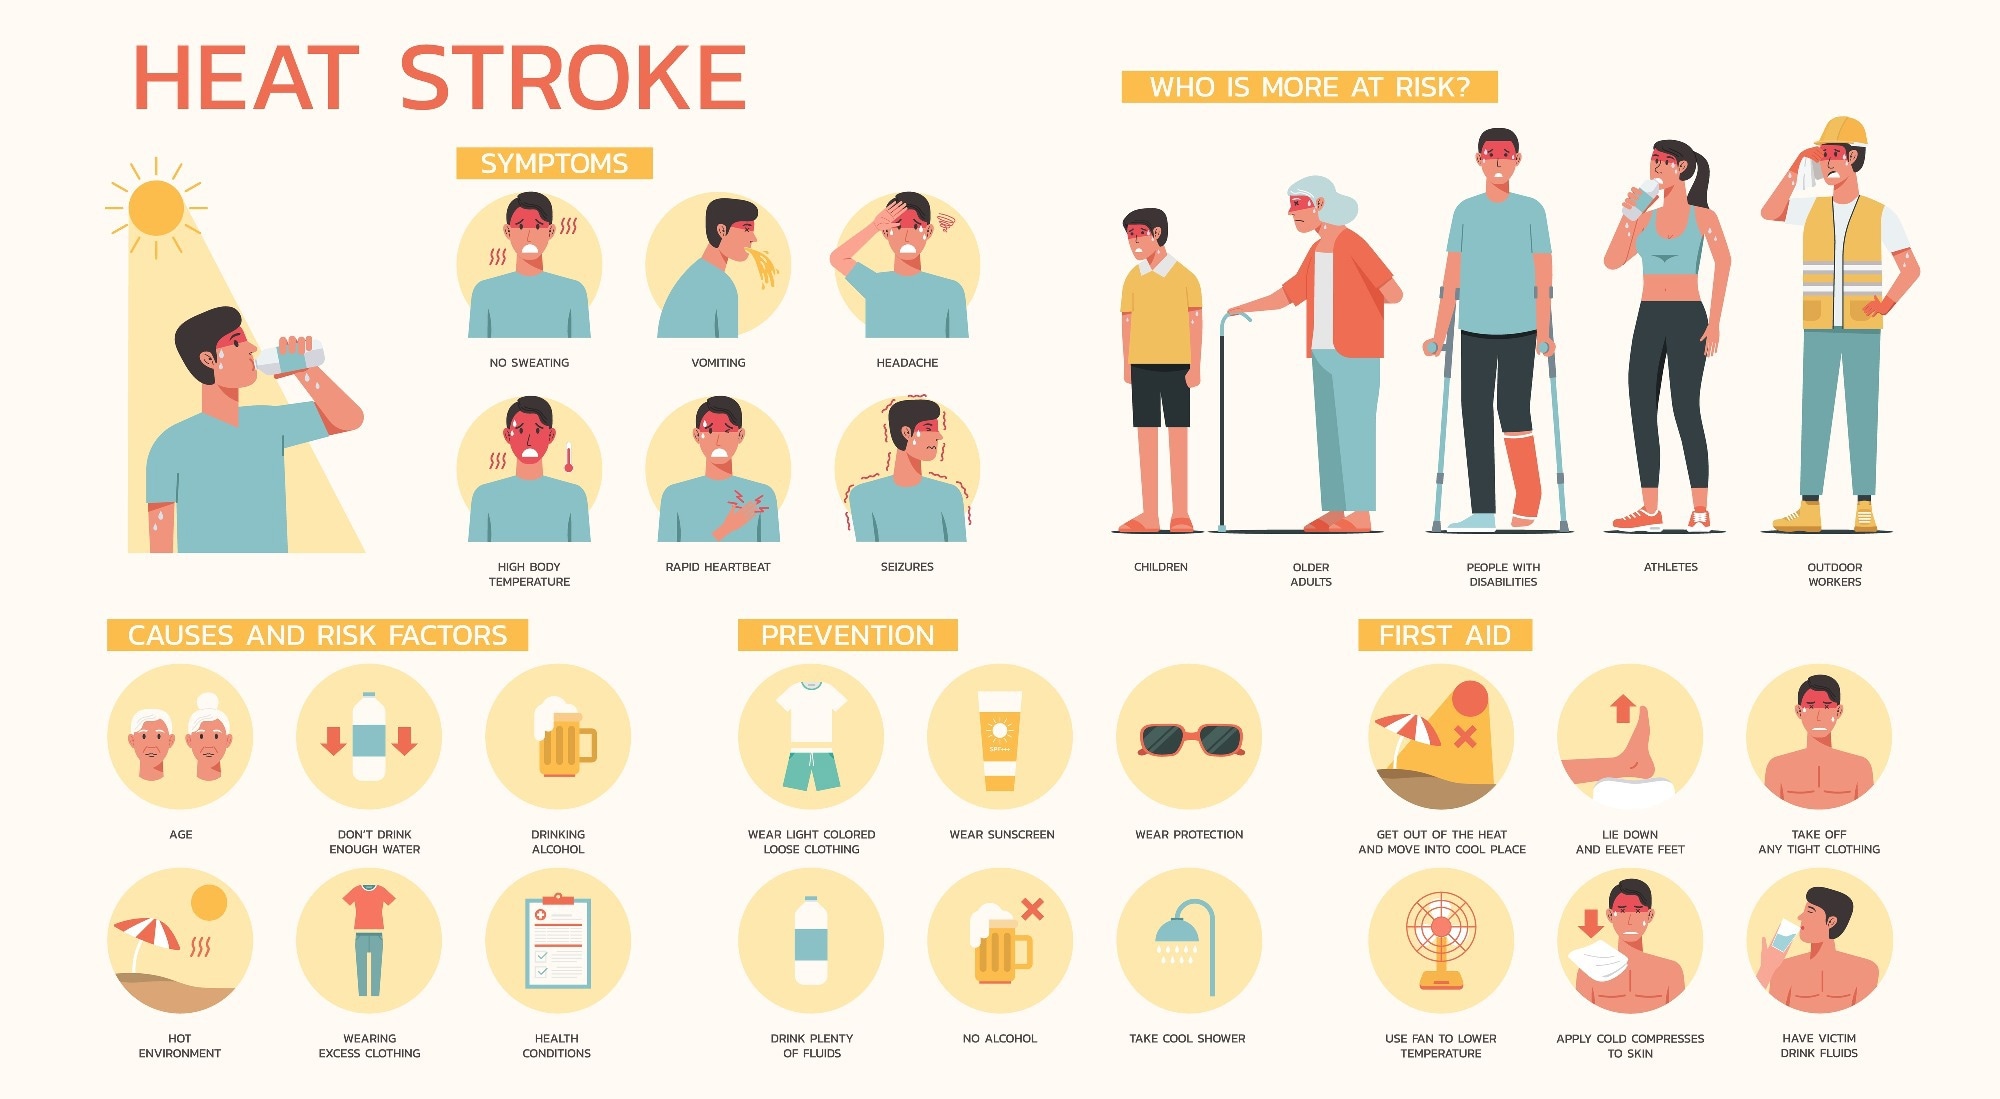 Heat stroke symptoms, causes and risk factors